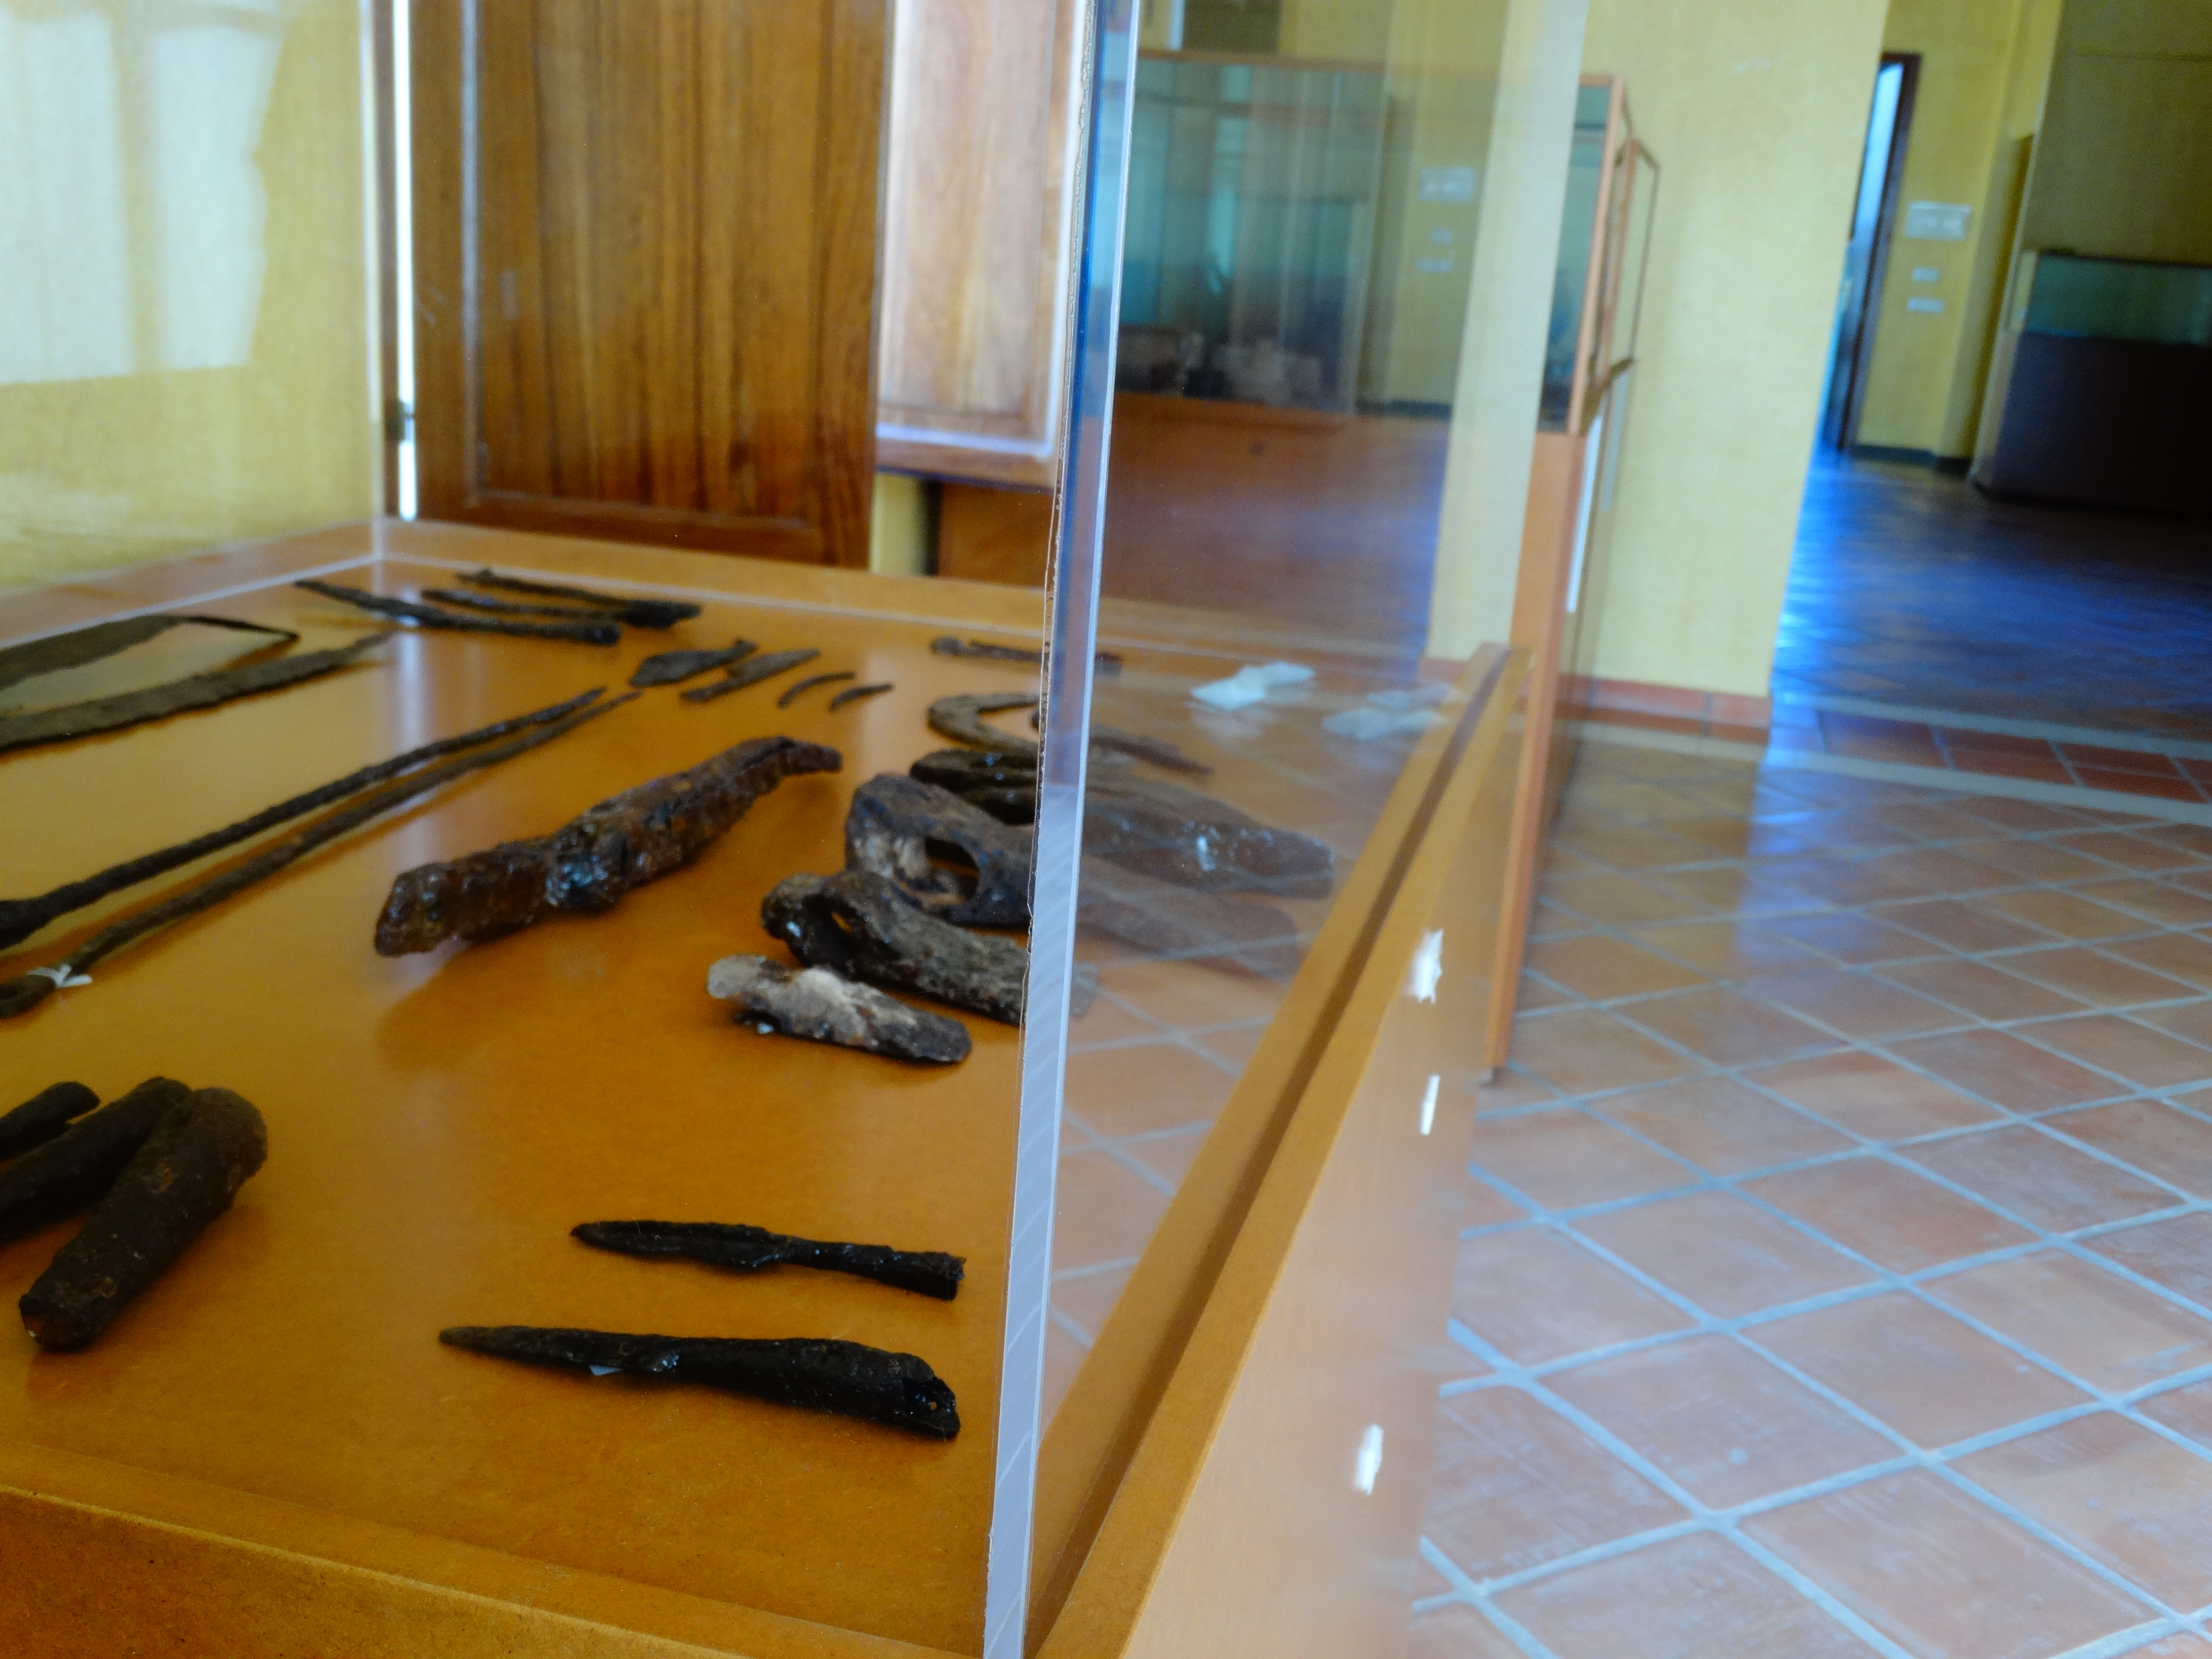 Museum Collection of Buñol